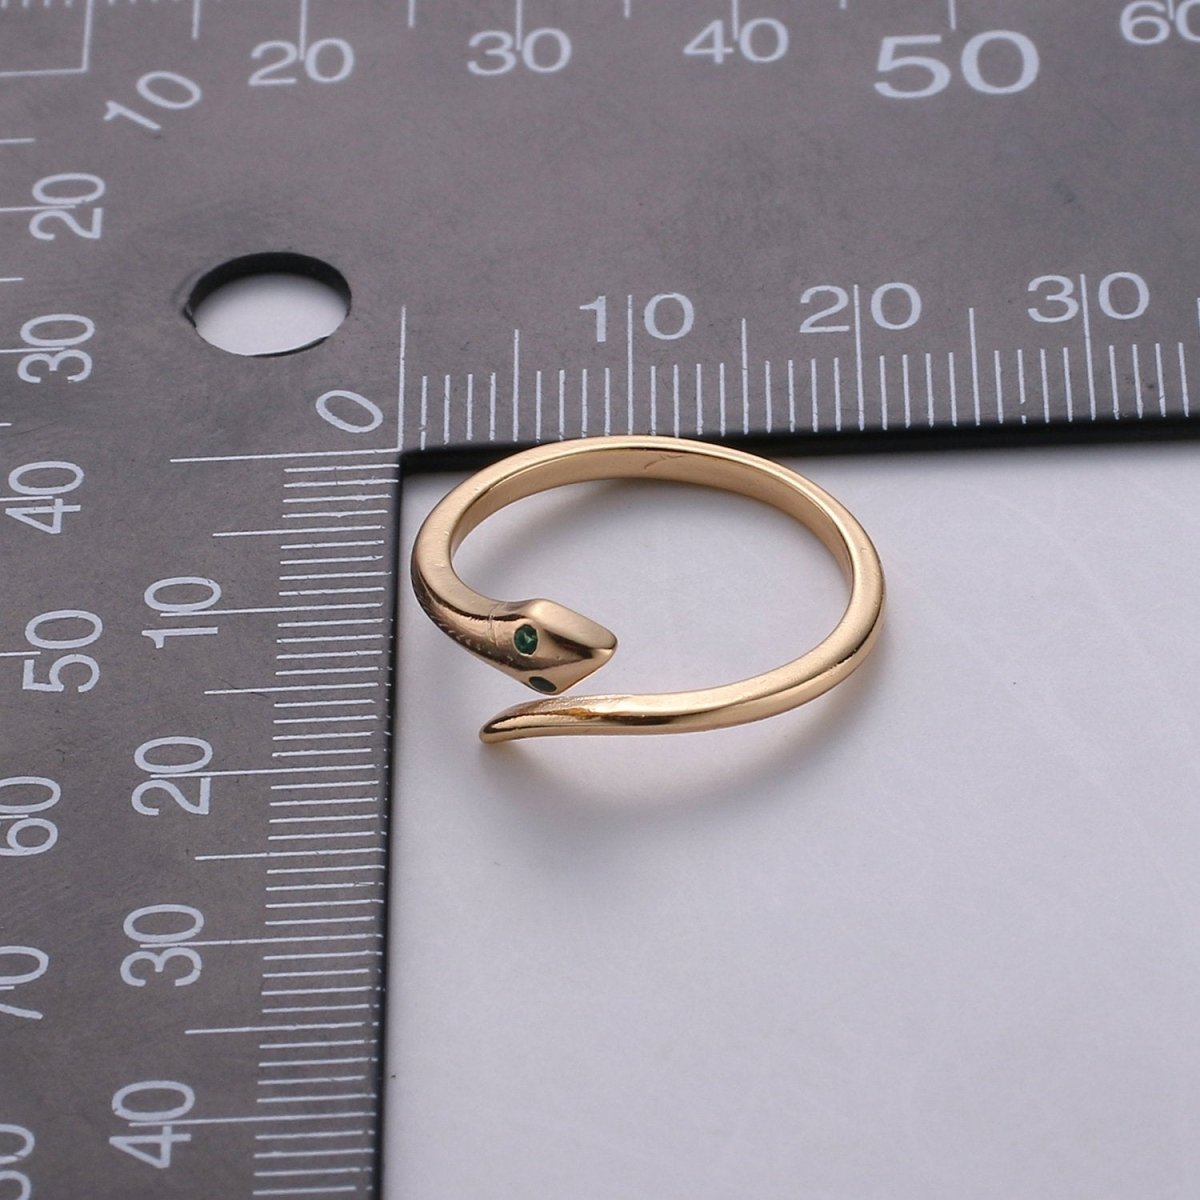 Snake Ring - Serpent Ring - Stackable Gold Ring - Minimalist Gold Ring - Thin Ring - Dainty Ring - Tiny Ring -Small Gold Ring -Delicate Ring R-046 - DLUXCA